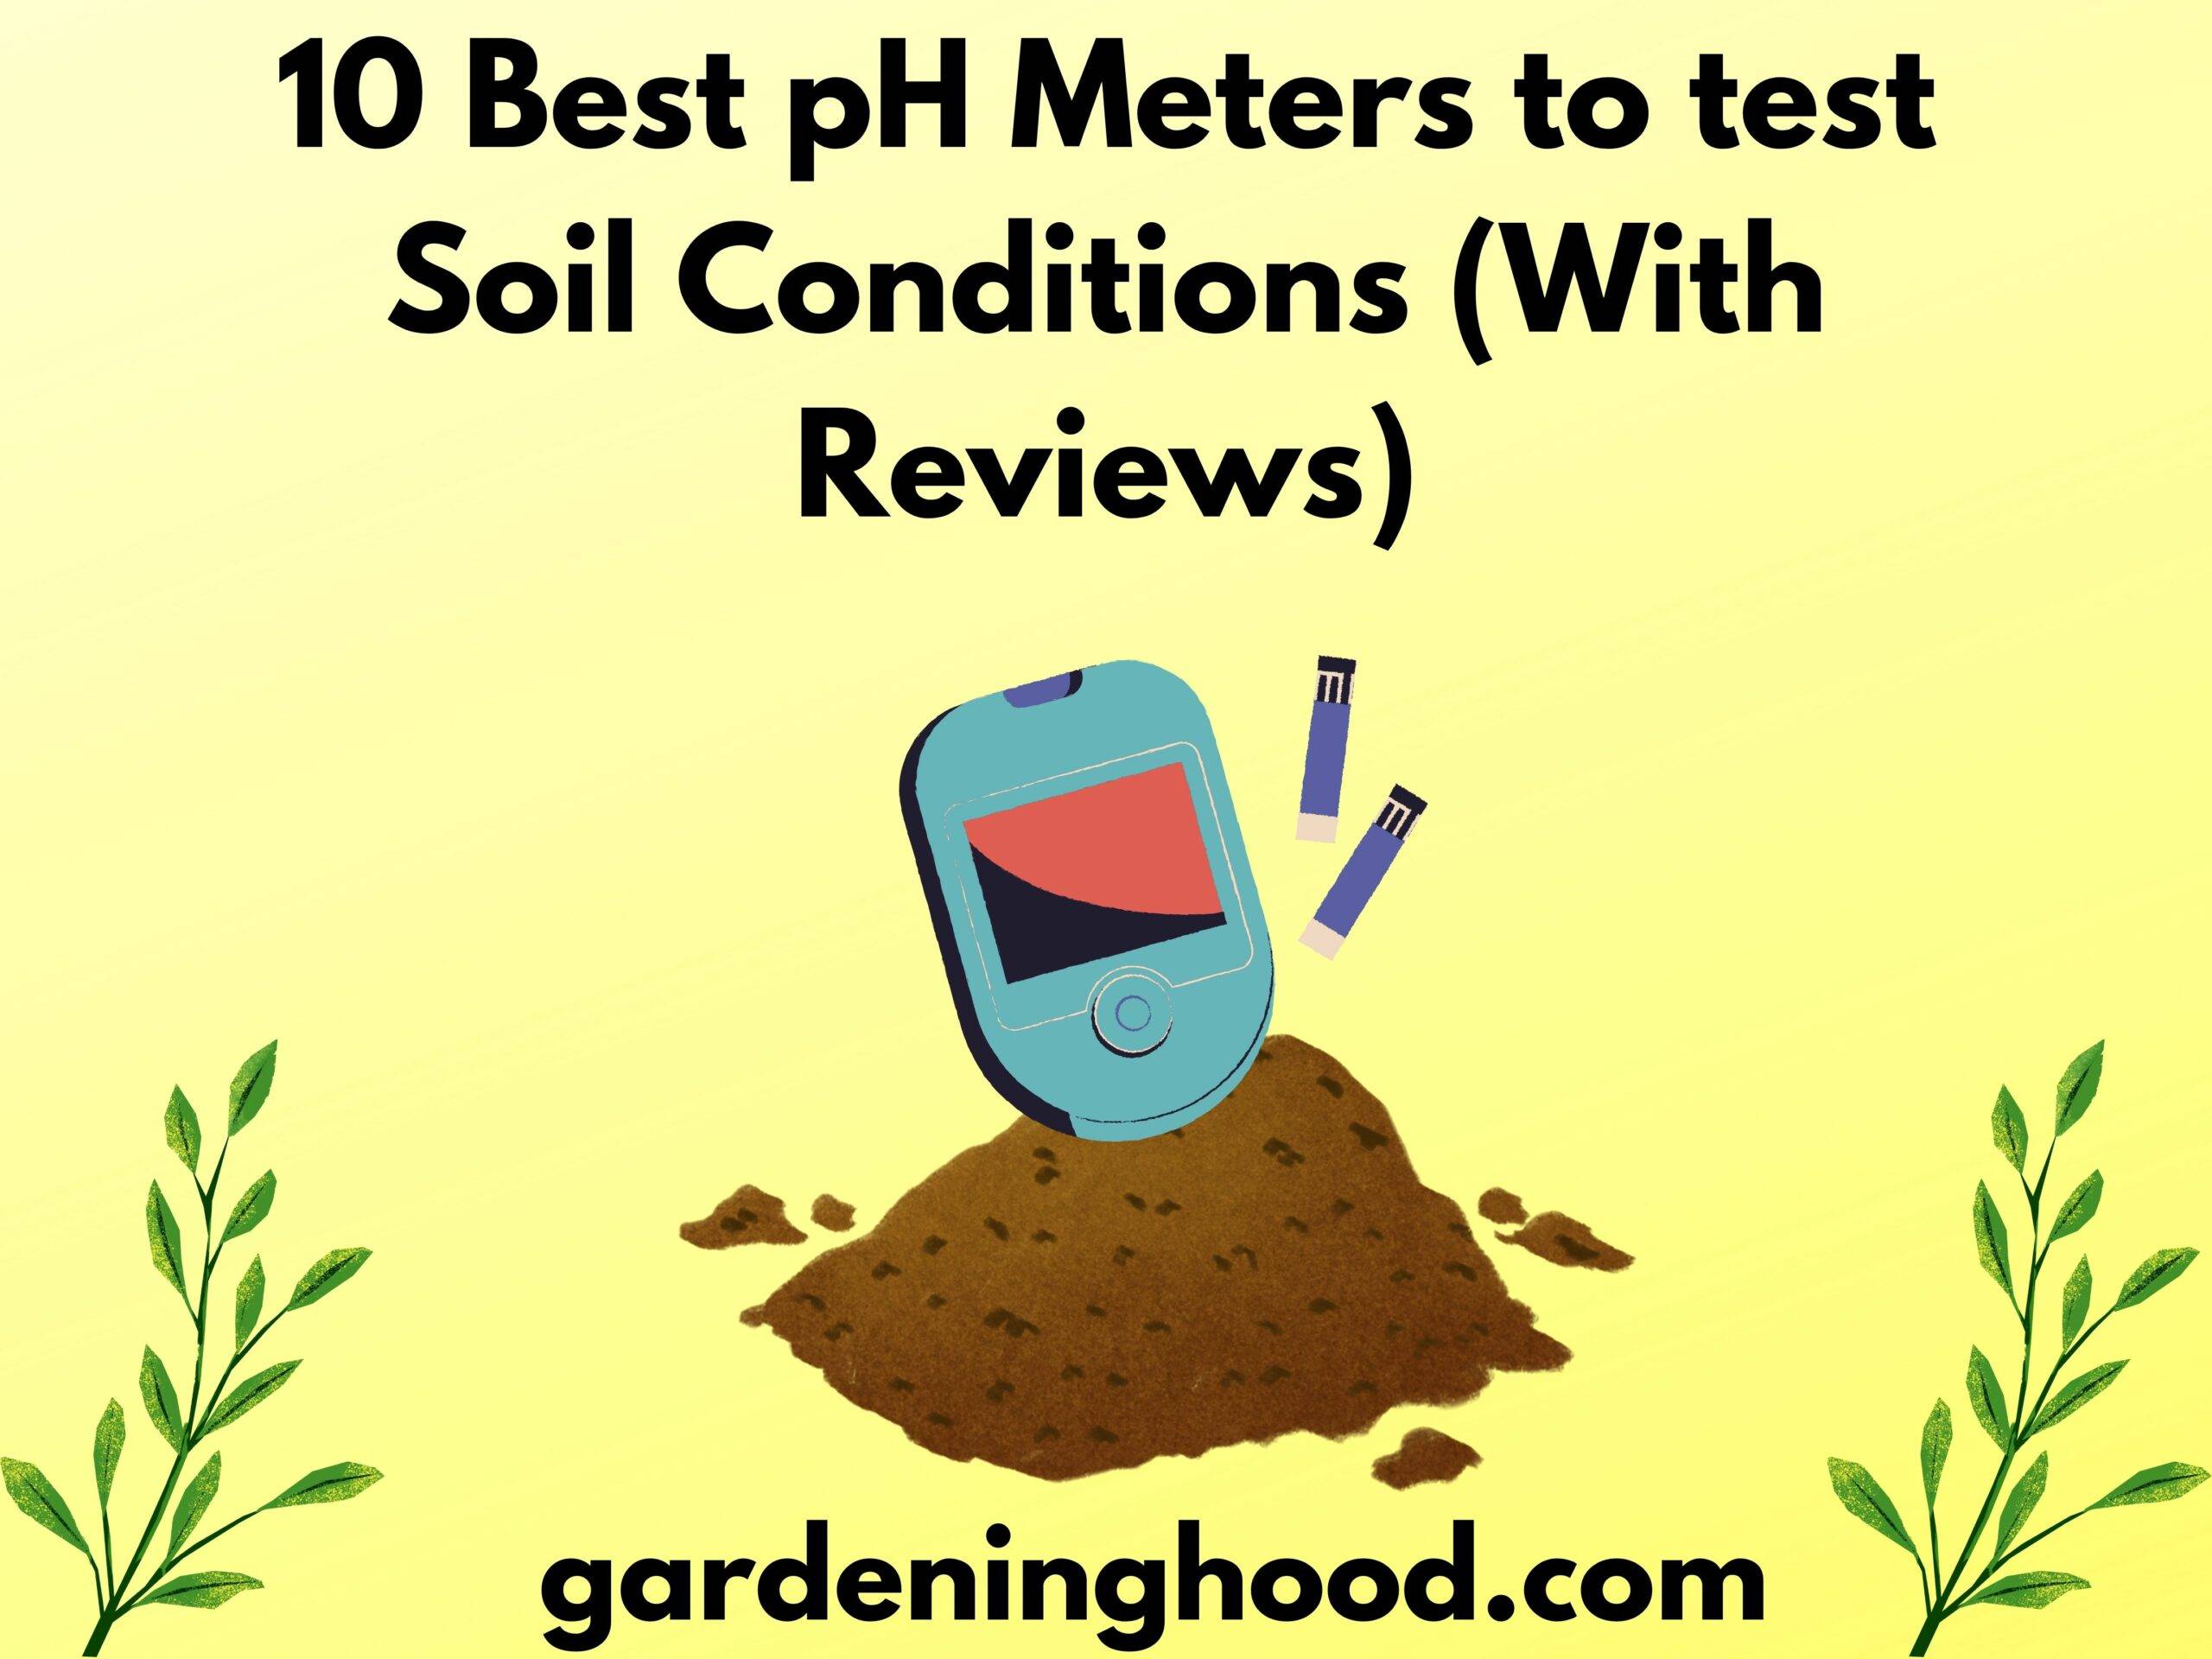 10 Best pH Meters to test Soil Conditions (With Reviews)